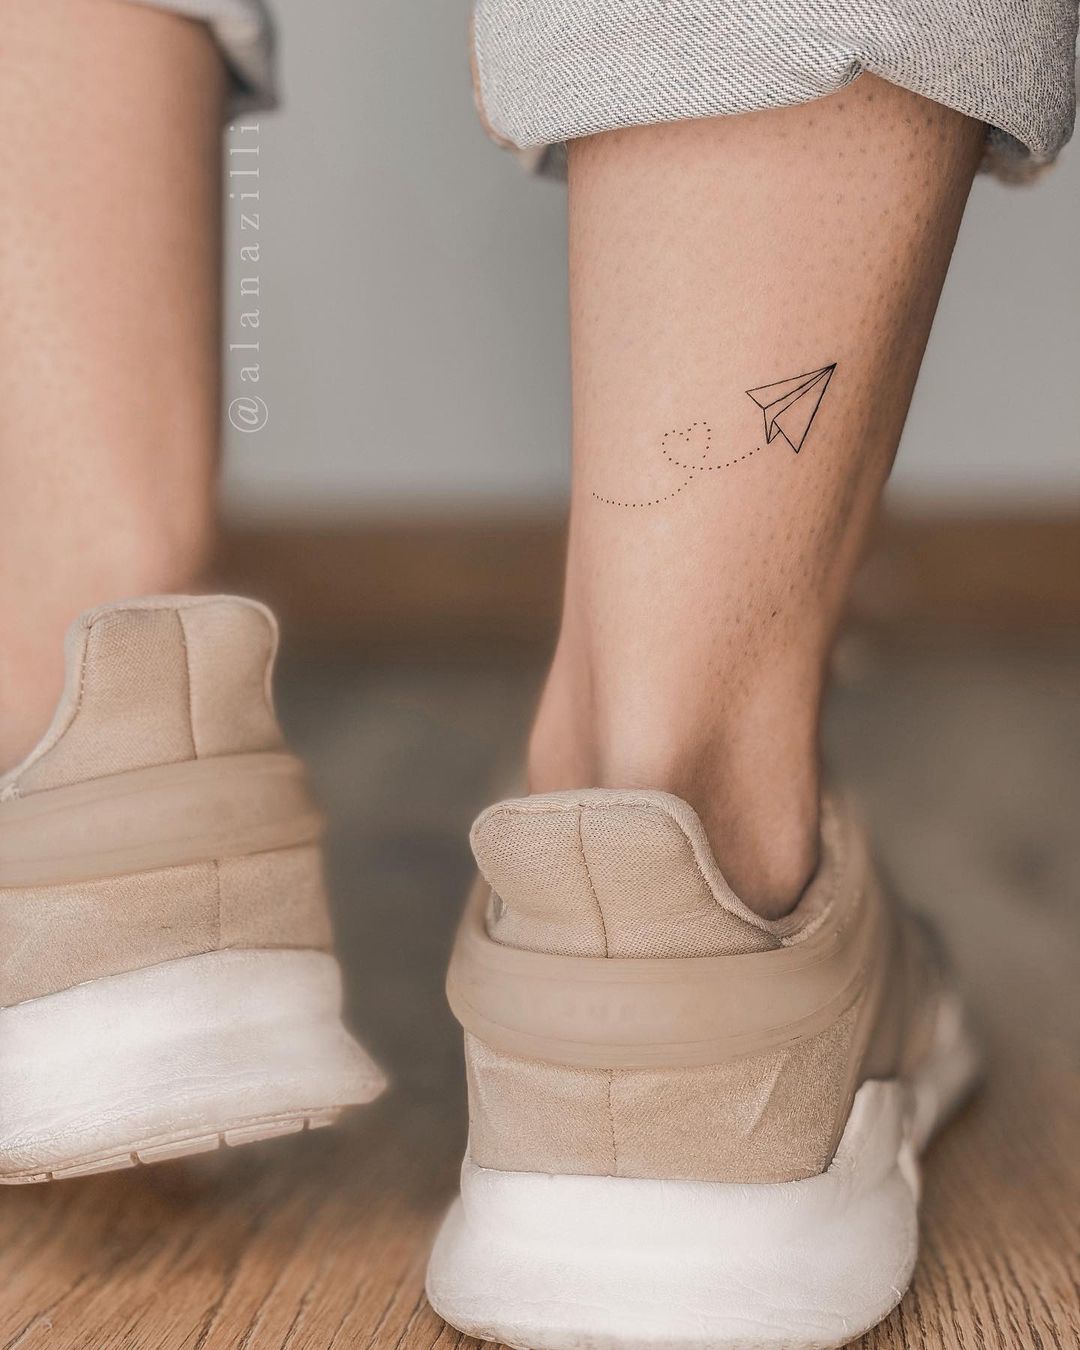 Best and simple unique Lett tattoo designs  very nice amazing idea   YouTube